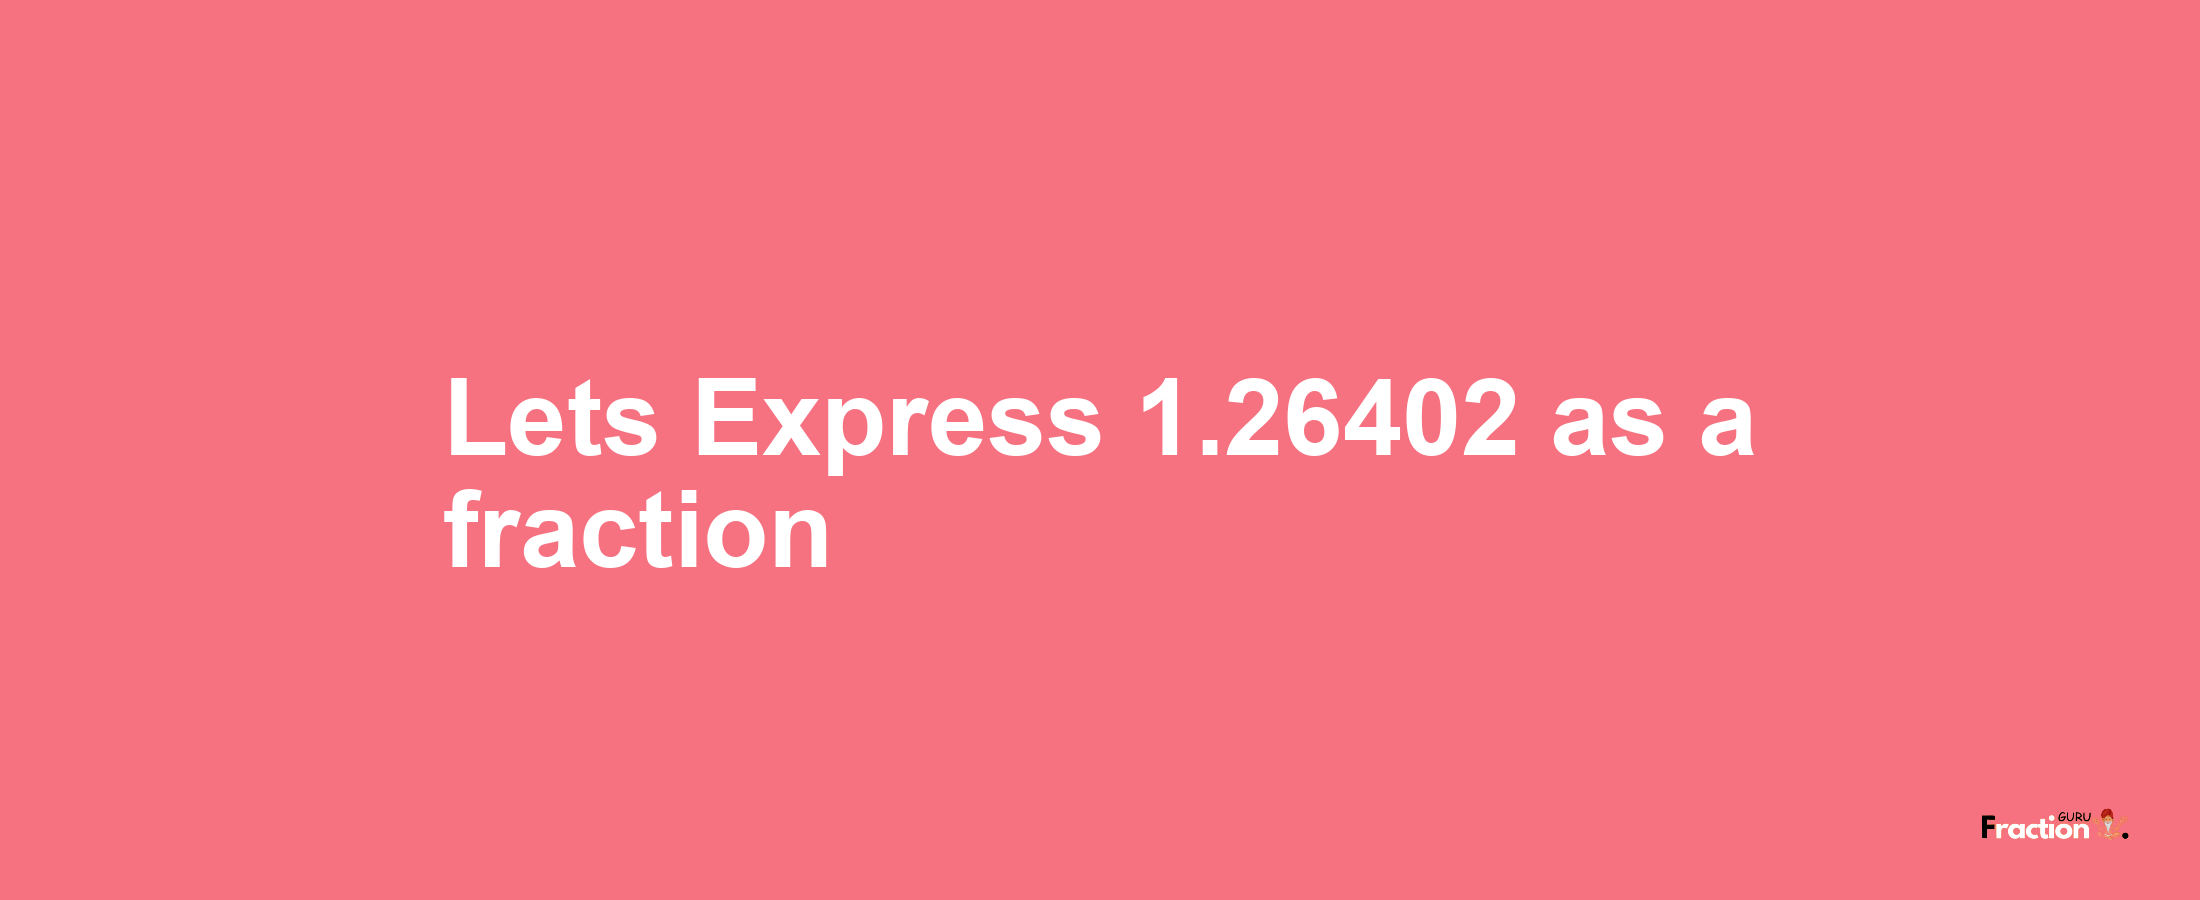 Lets Express 1.26402 as afraction